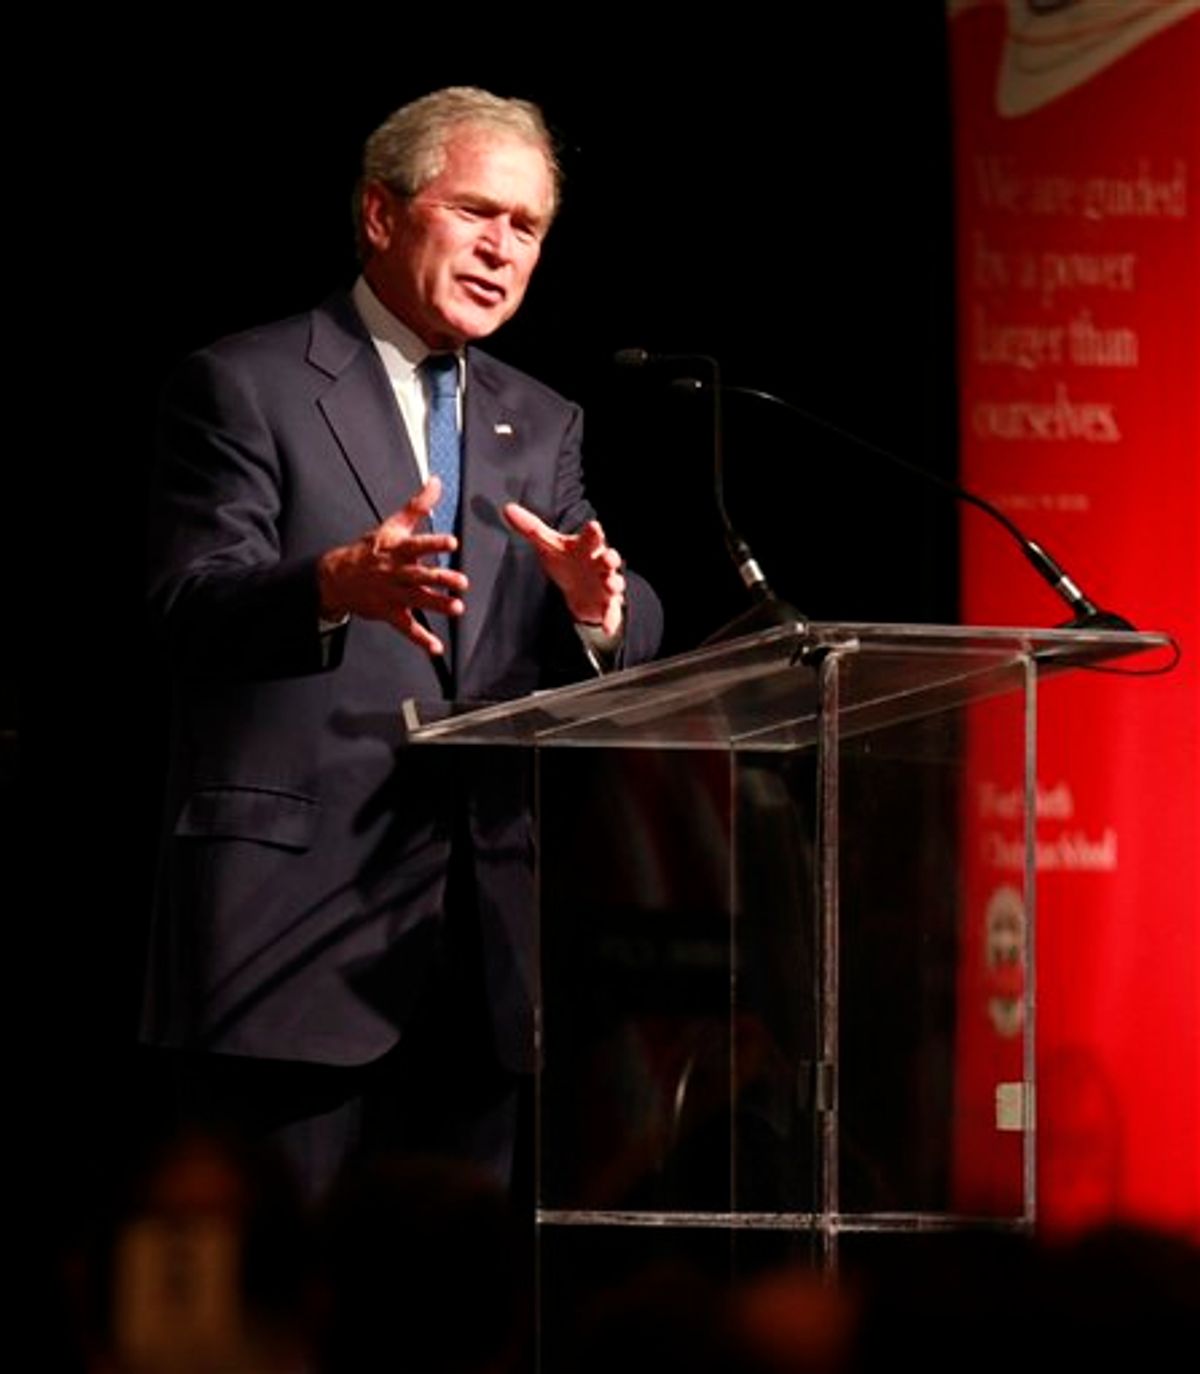 Former President George W. Bush speaks at the Fort Worth Christian Schools Gala held at the Omni Hotel, Saturday, Feb. 27, 2010 in Fort Worth, Texas.  The gala was held to celebrate the schools success and to honor President Bush's services as the 43rd president of the United States and as the 46th governor of Texas. (AP Photo/Jeffery Washington) (AP)